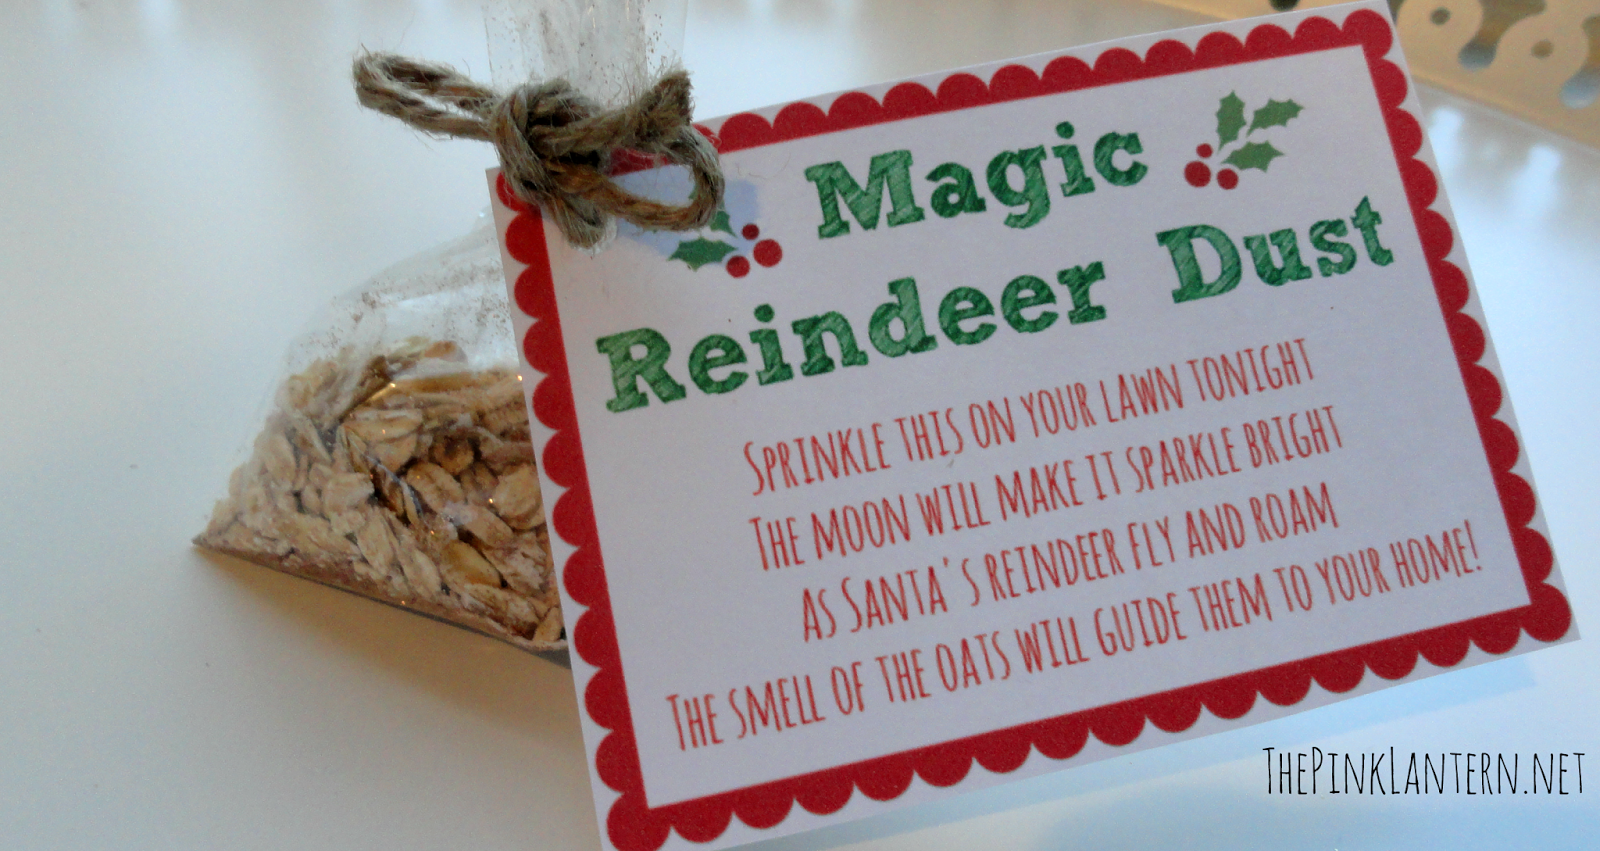 How To Make Magic Reindeer Dust For Christmas: WATCH